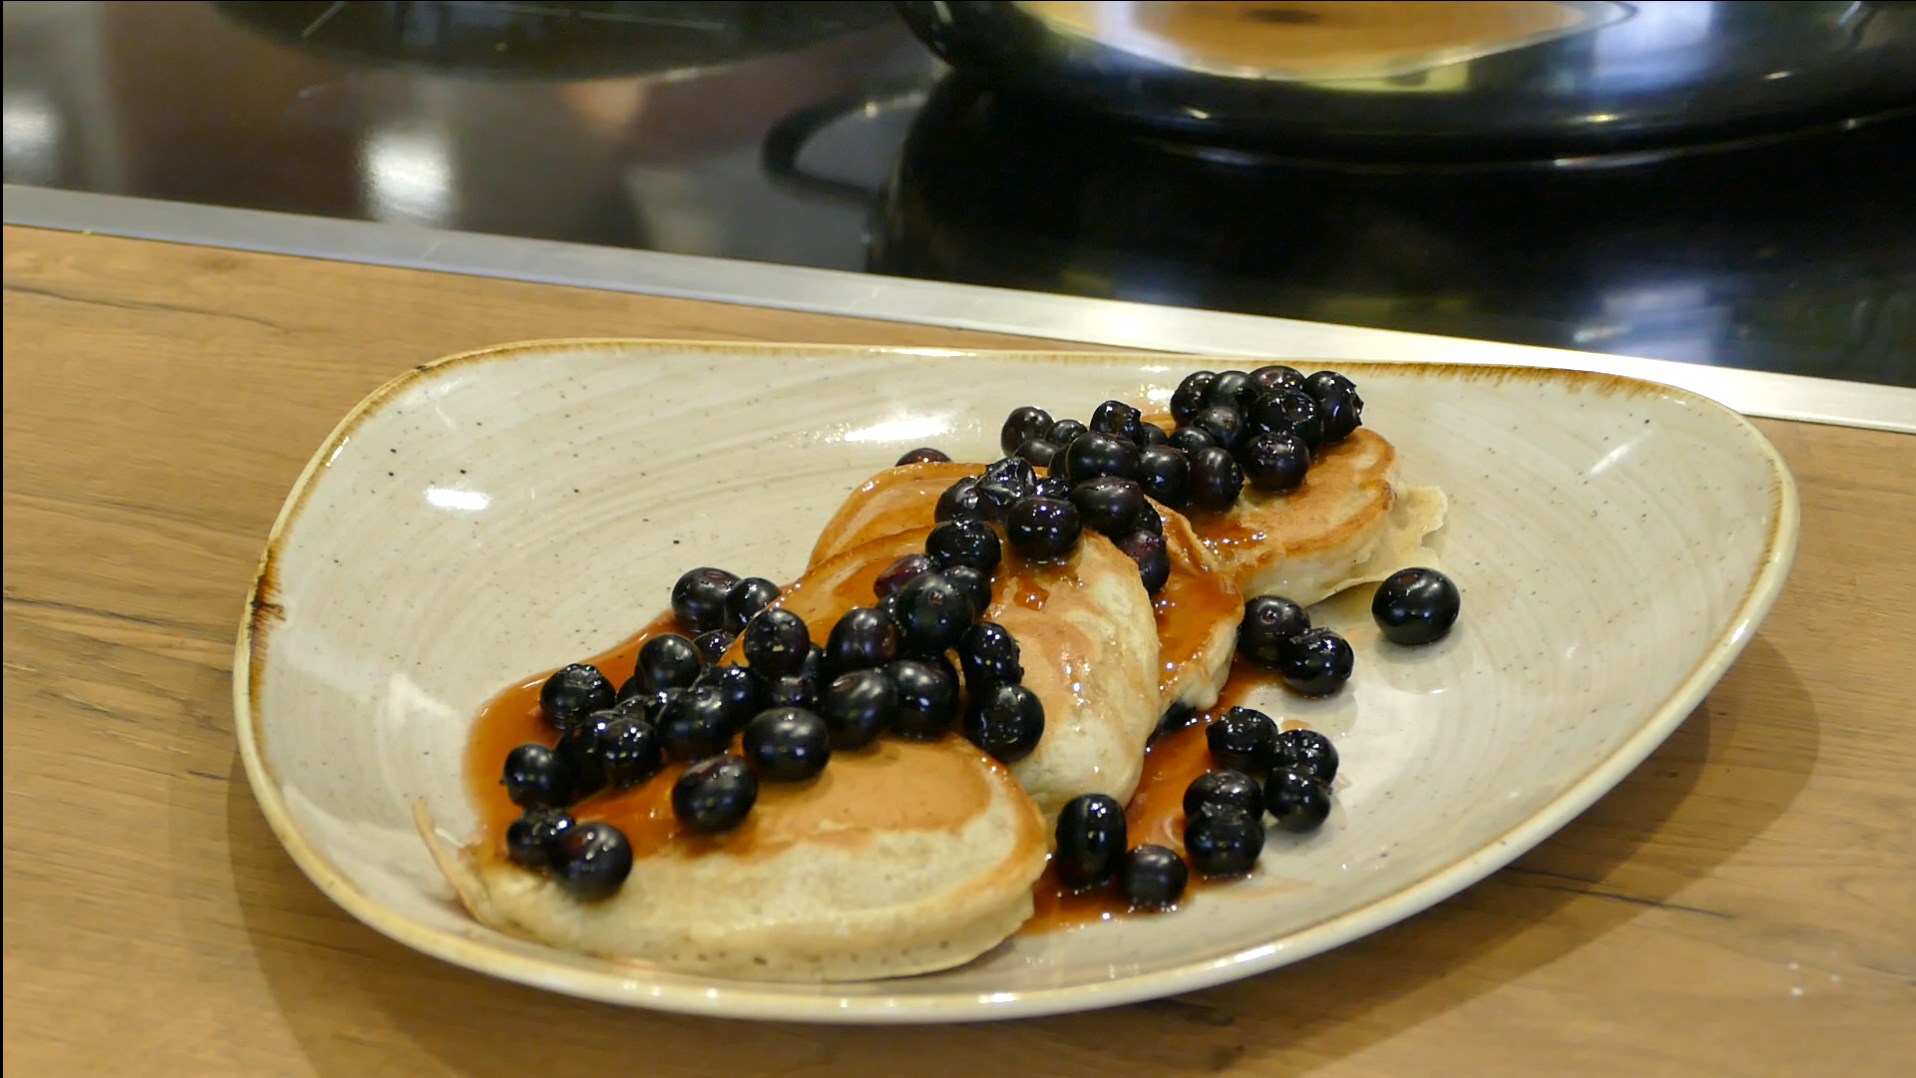 Pancakes are decorated with blueberries on a cream-coloured plate with a golden rim, which is placed on a light wooden table.